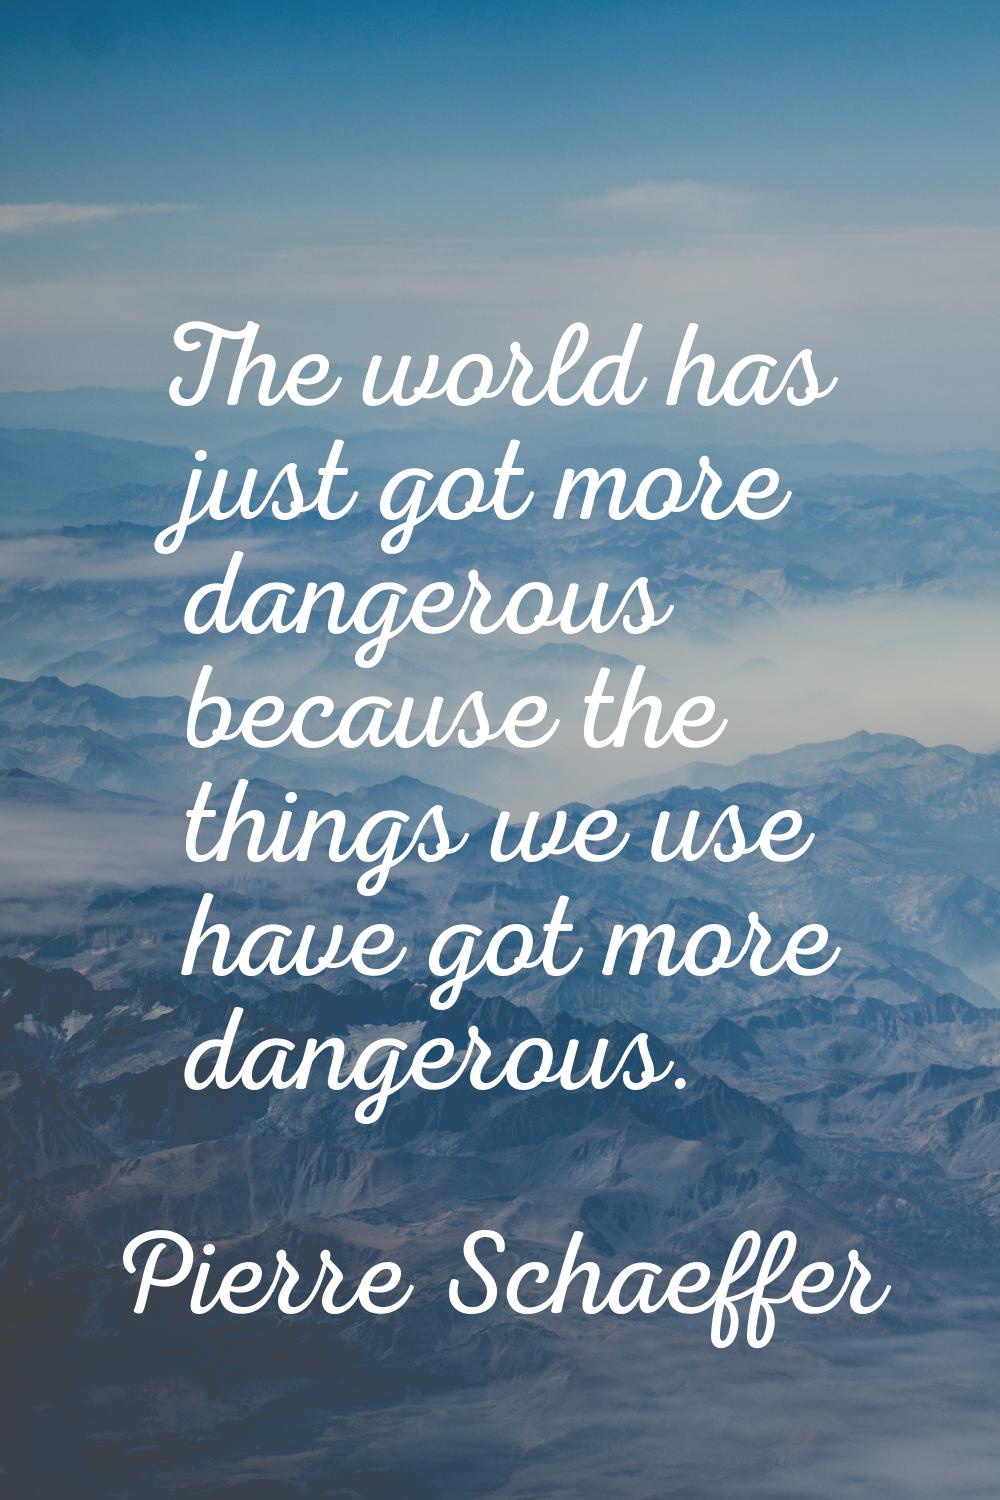 The world has just got more dangerous because the things we use have got more dangerous.